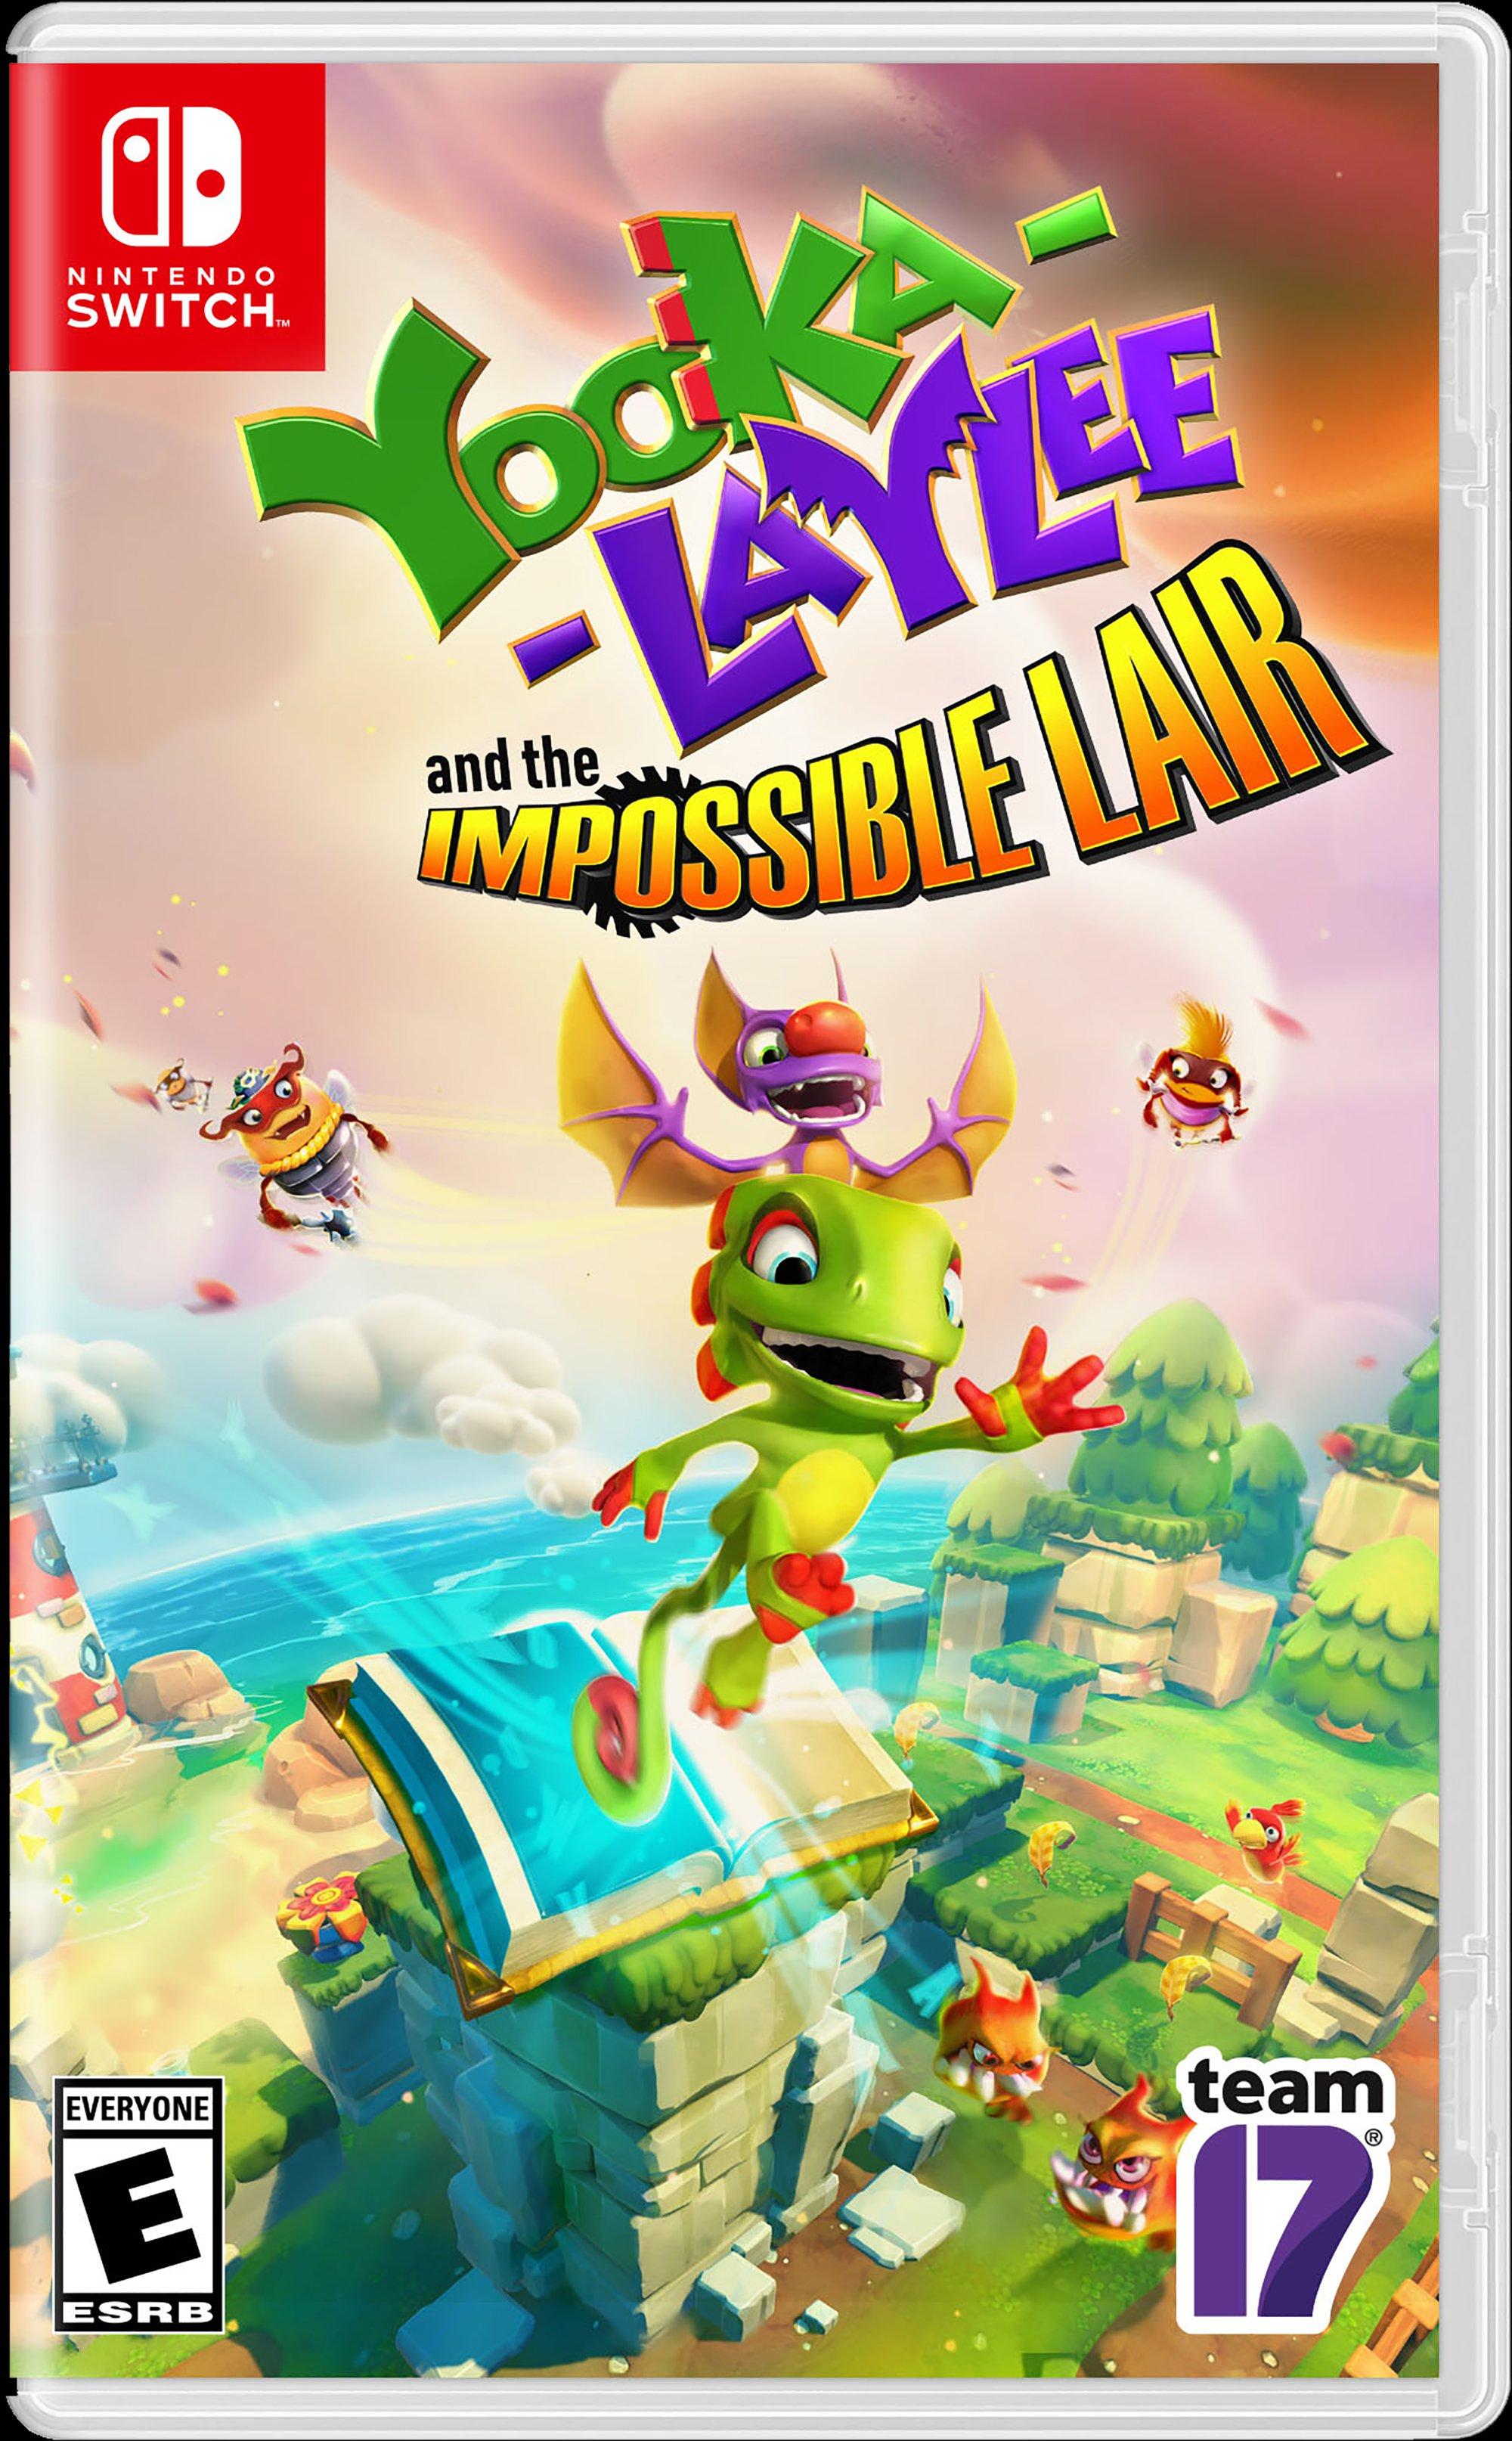 | | Impossible Yooka-Laylee Switch Lair Nintendo GameStop the and